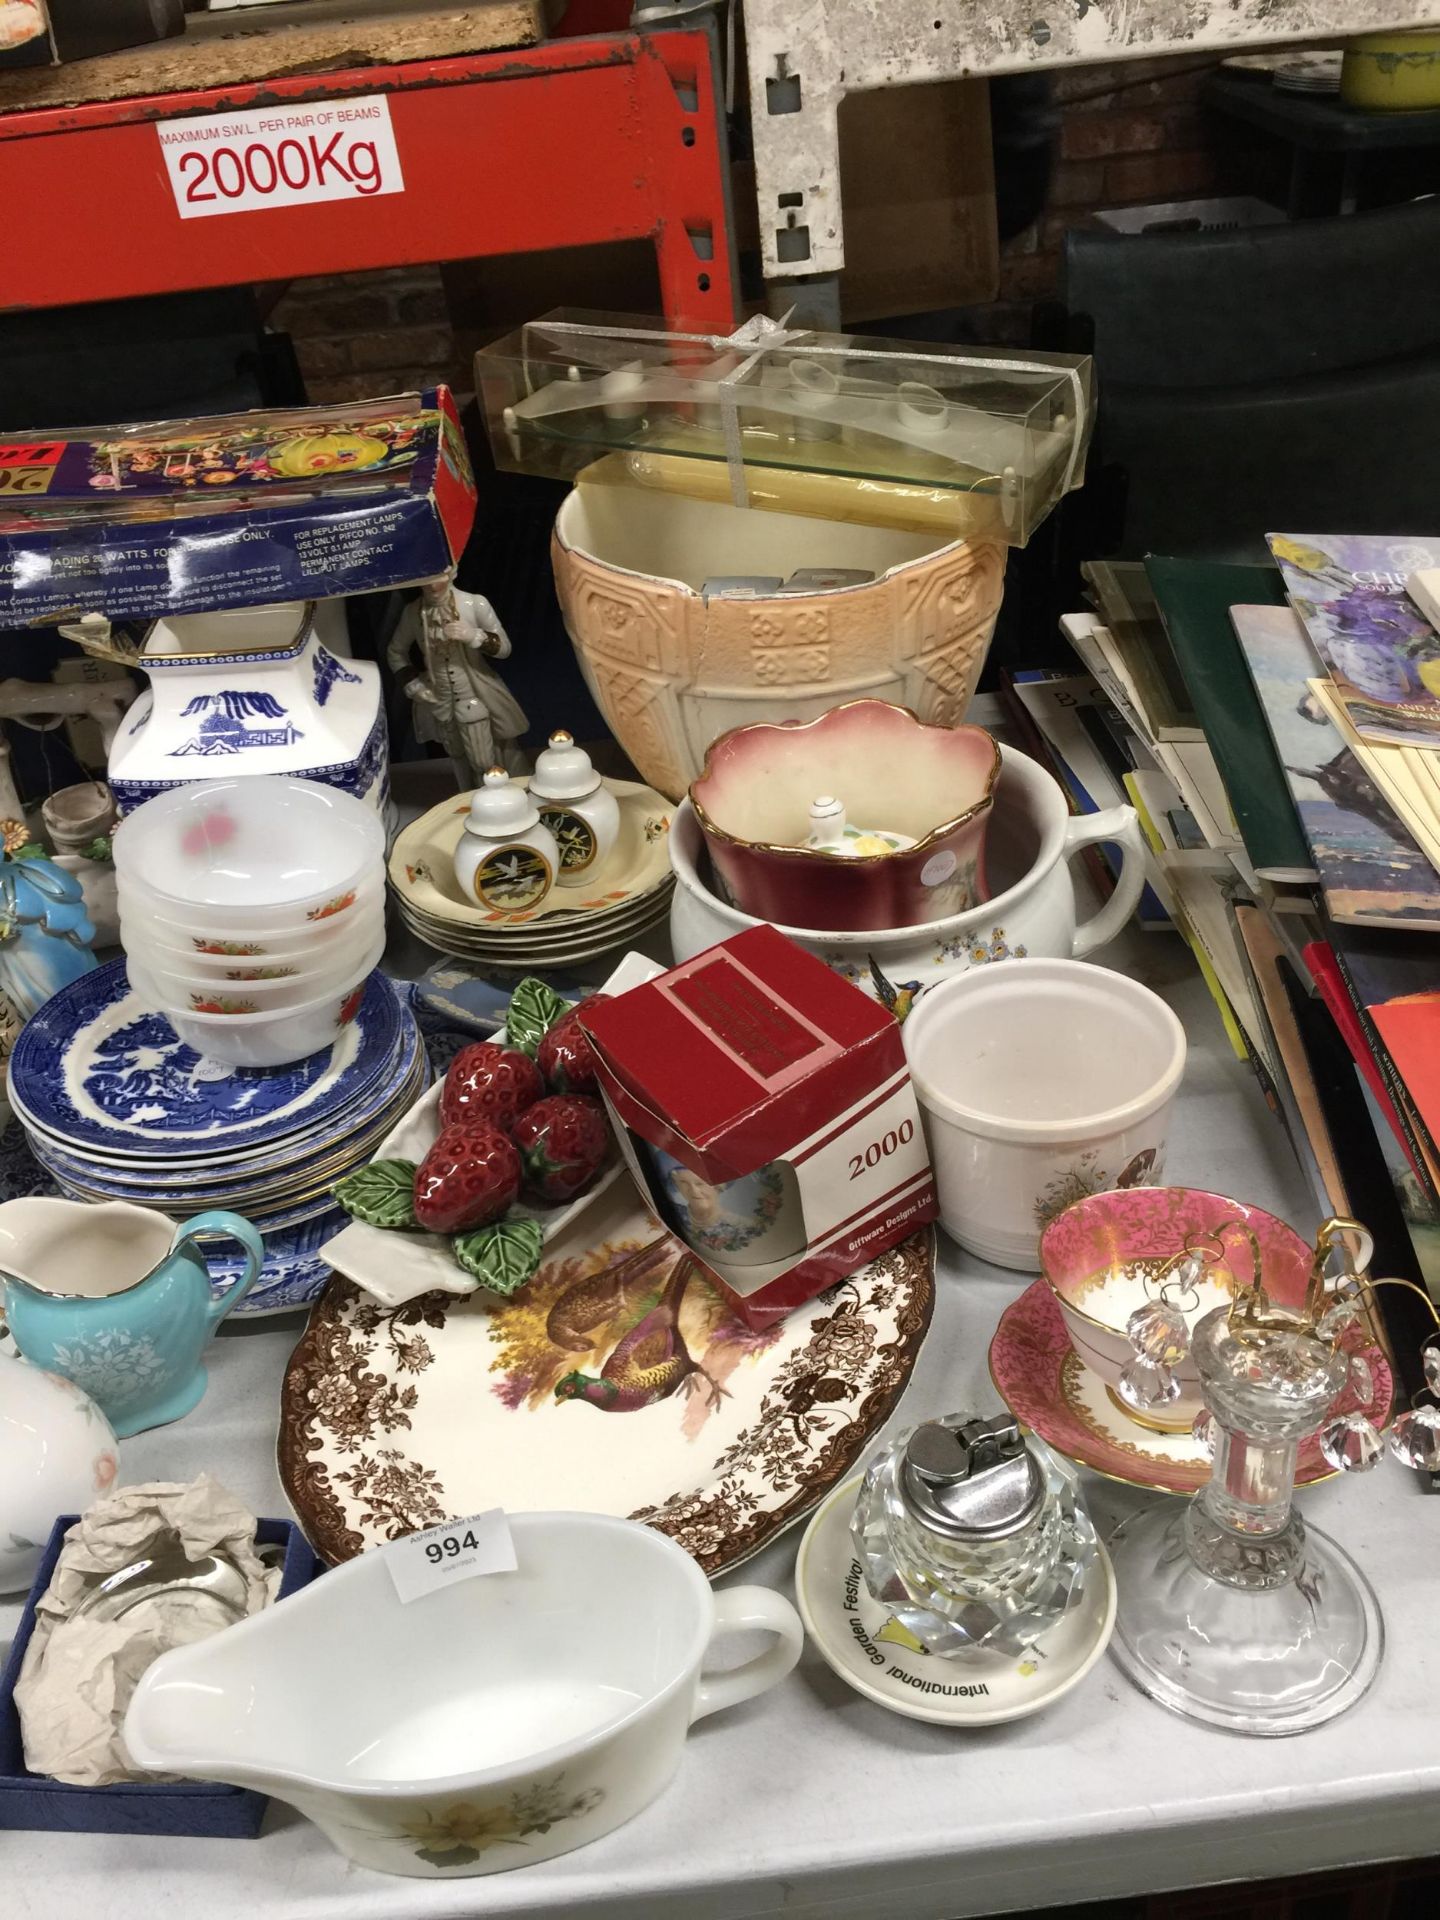 A VERY LARGE MIXED LOT TO INCLUDE PLATES, PLANTERS, VASES, GLASSWARE, VINTAGE CHRISTMAS LIGHTS, - Image 3 of 4